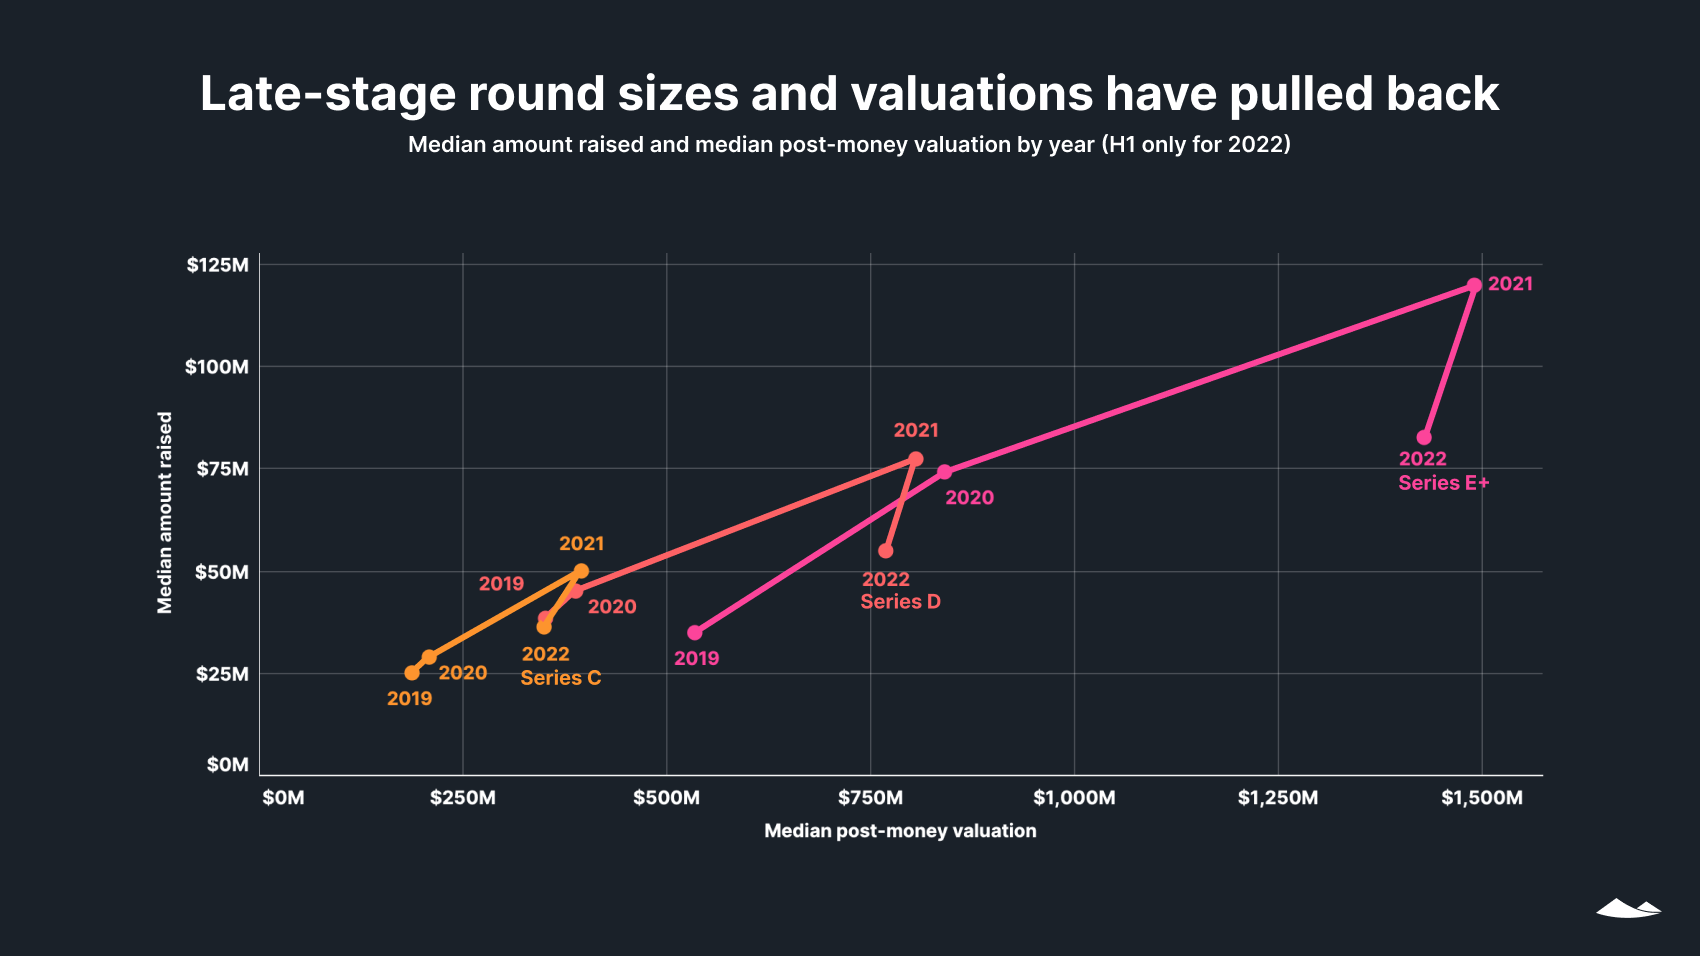 Late-stage round sizes and valuations have pulled back: Median amount raised and valuation by year (H1 only for 2022). 